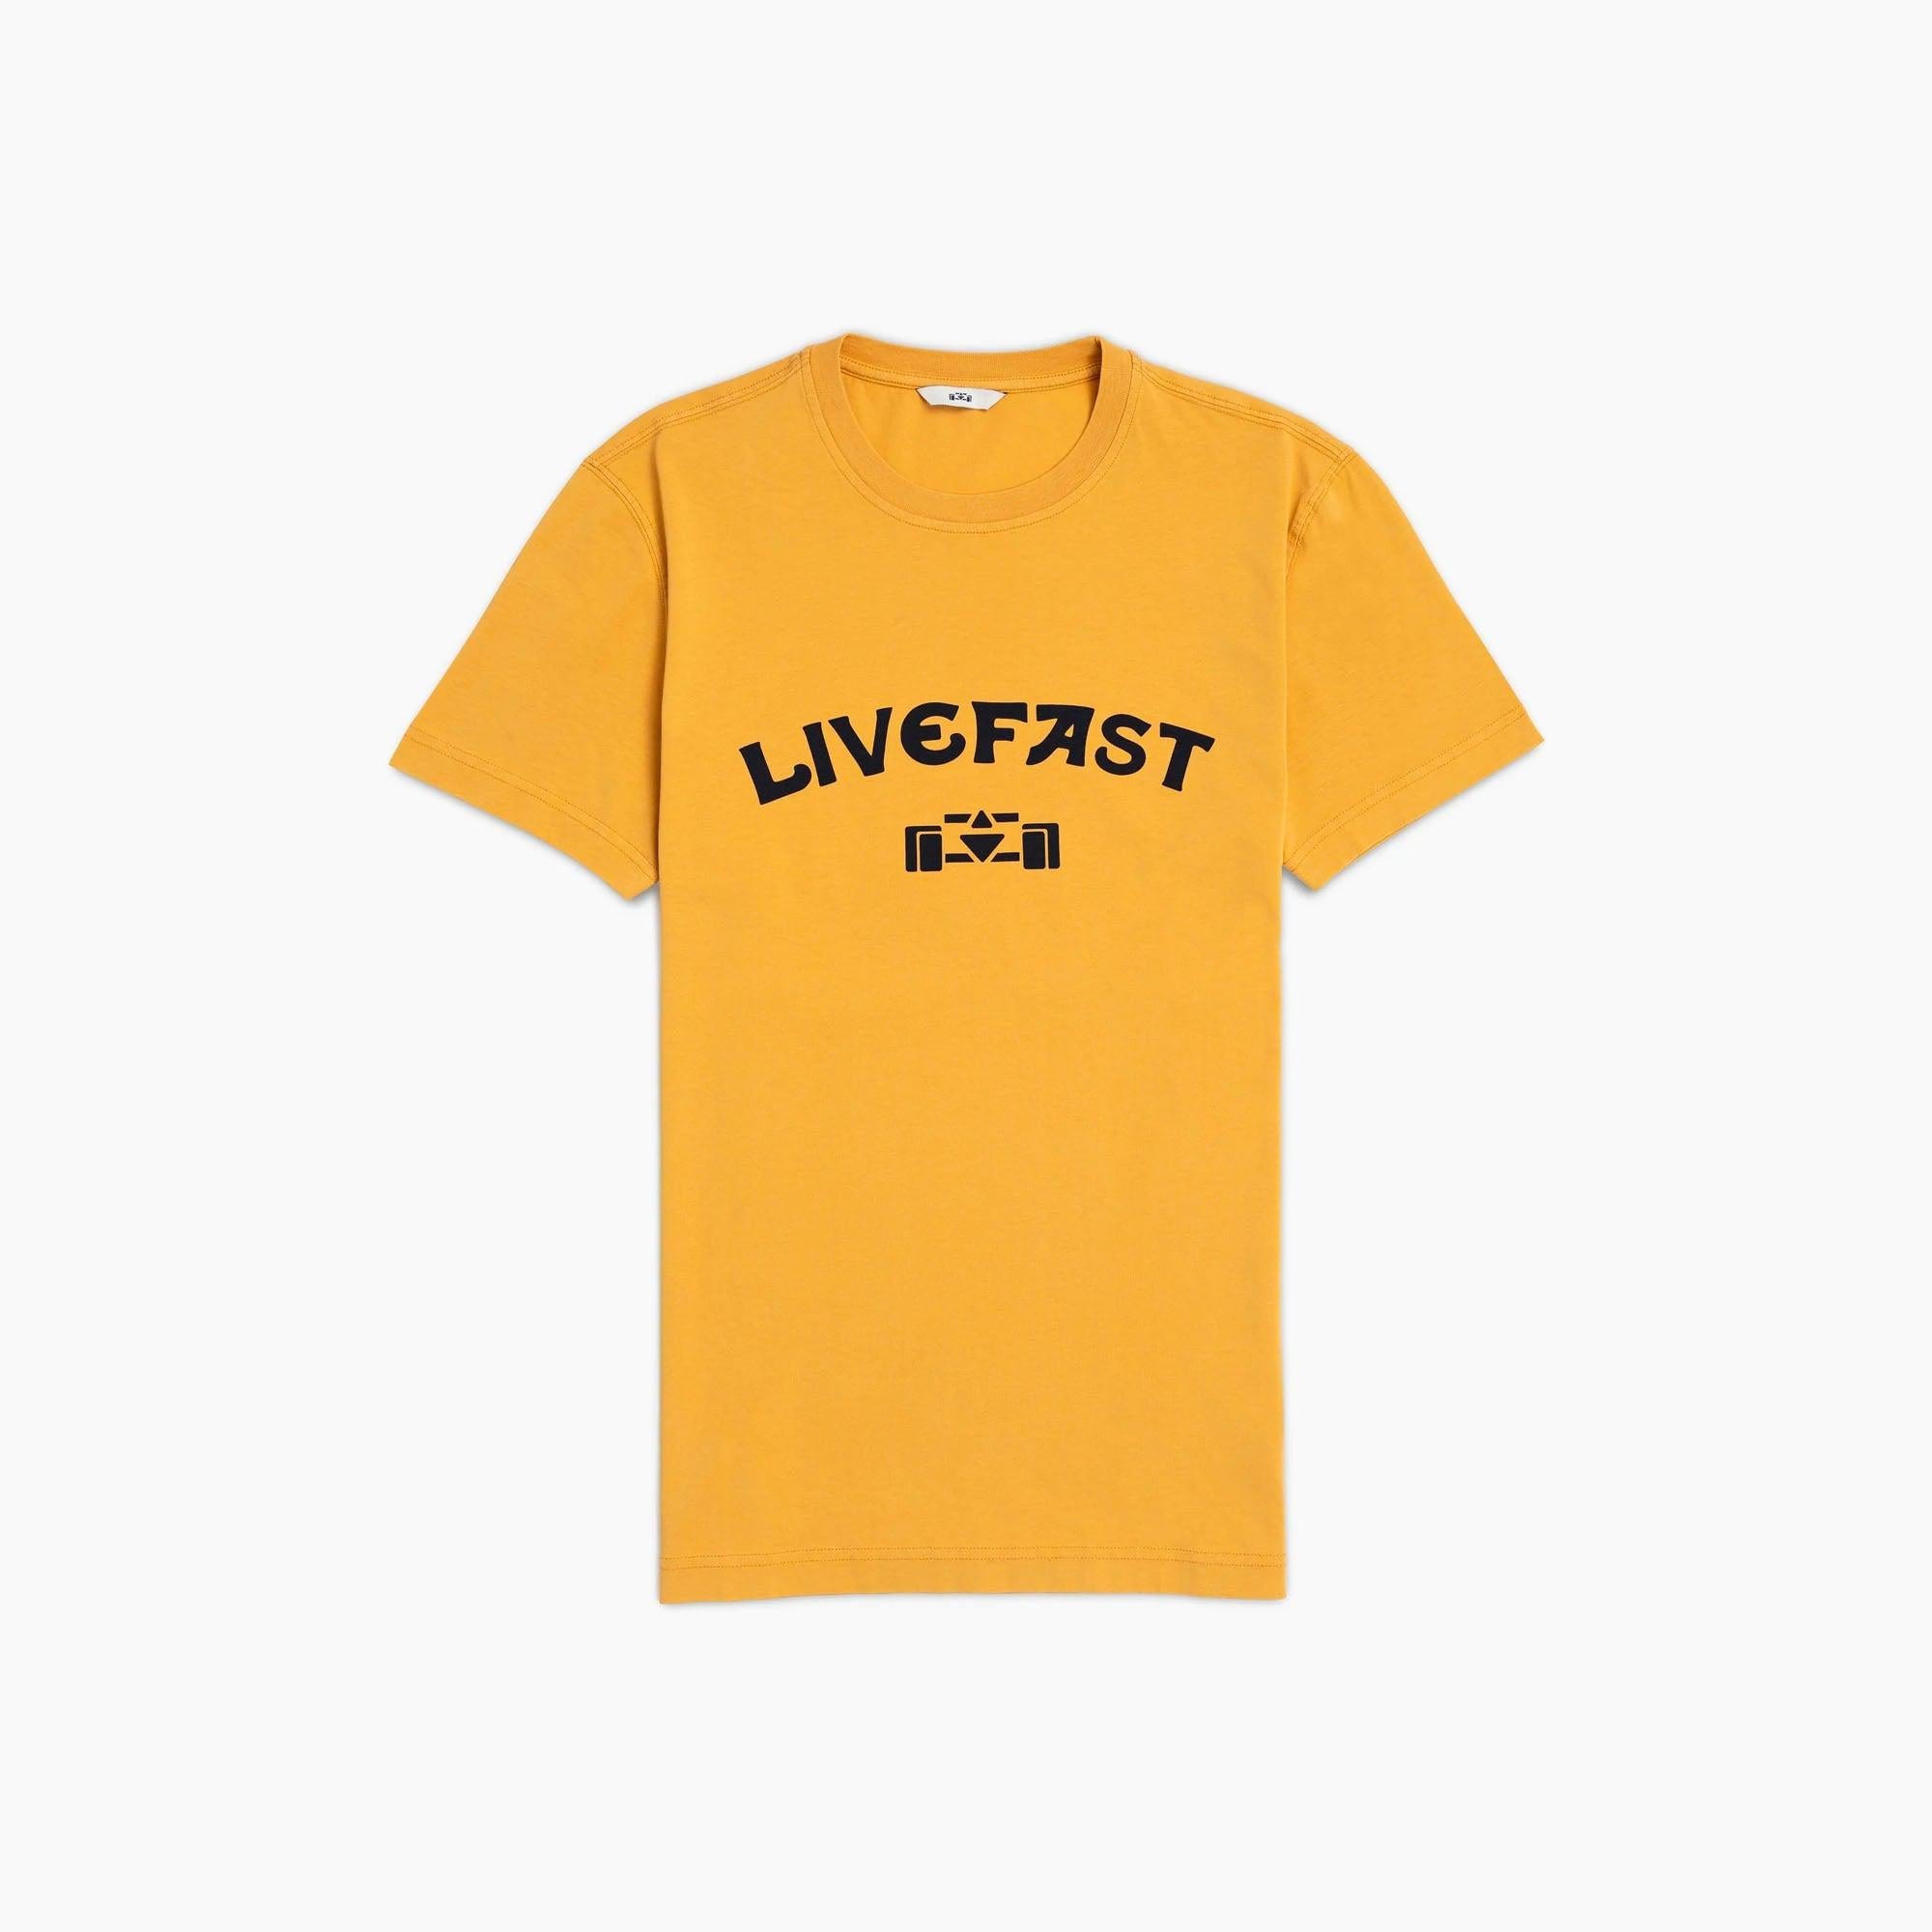 8JS | Vintage Trophy Yellow Washed T-Shirt-T-Shirt-8JS-gpx-store